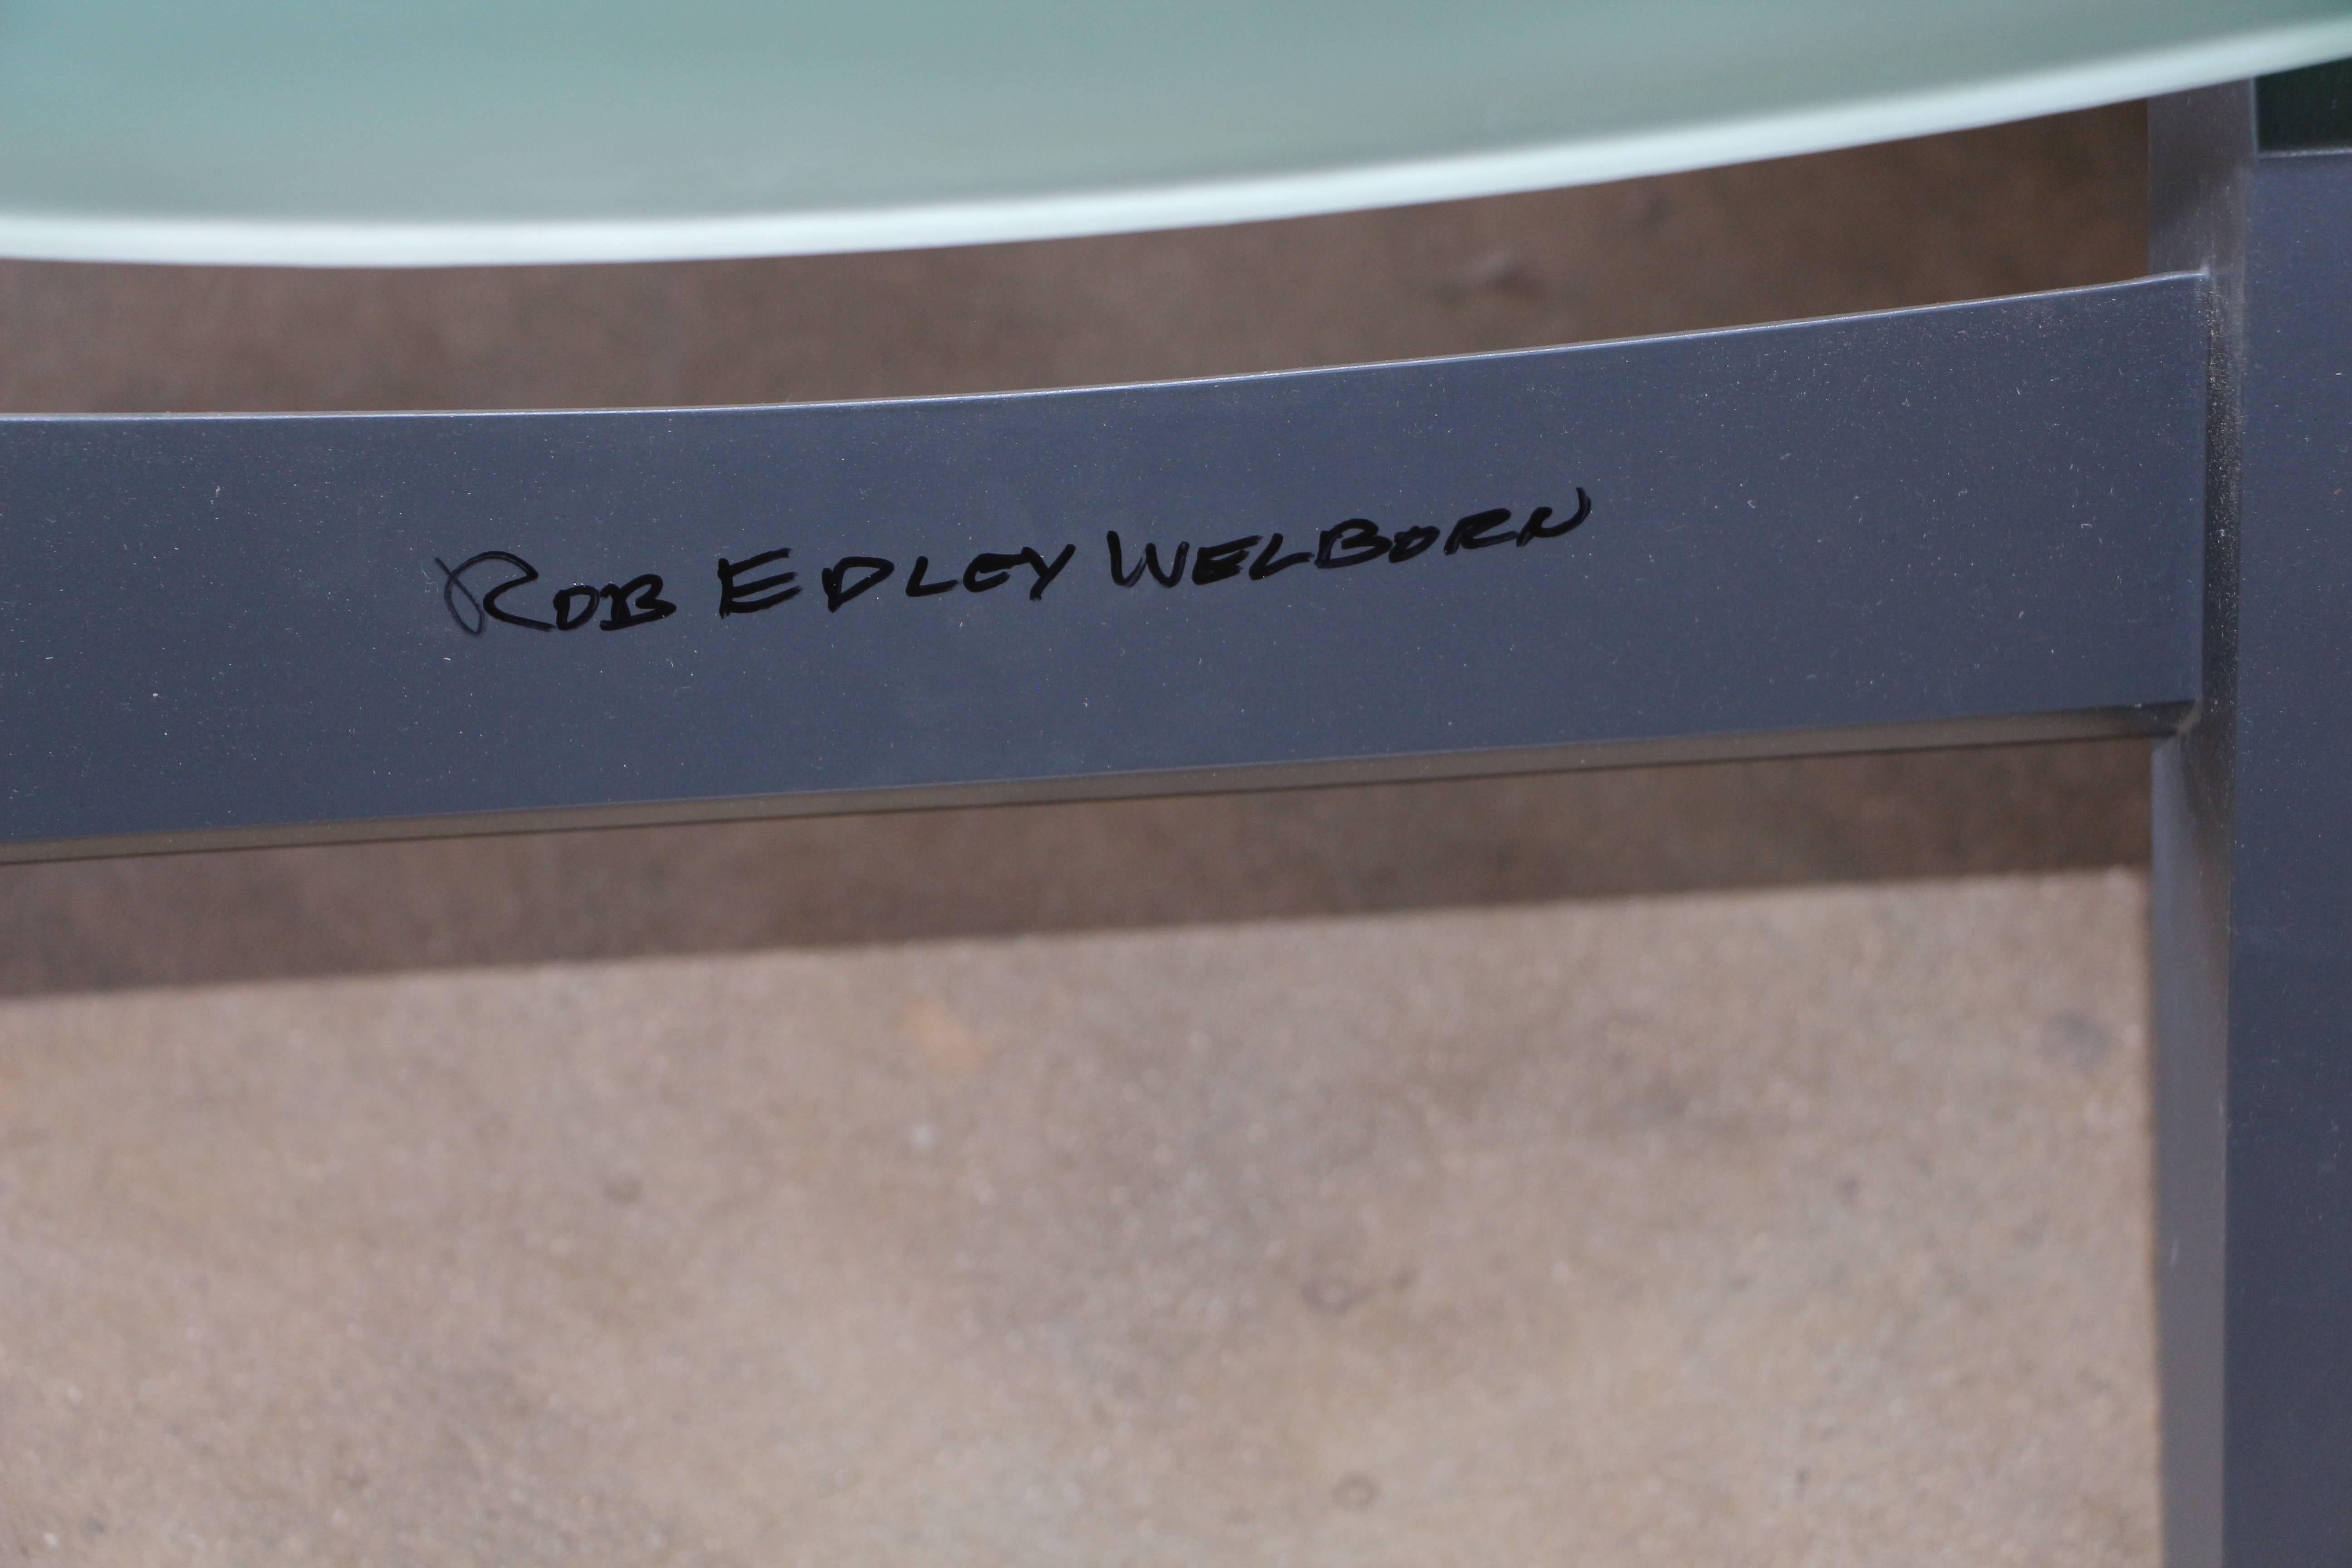 Acrylic Rob Edley Welborn Prototype Lounge Chair in Plexiglass and Painted Wood